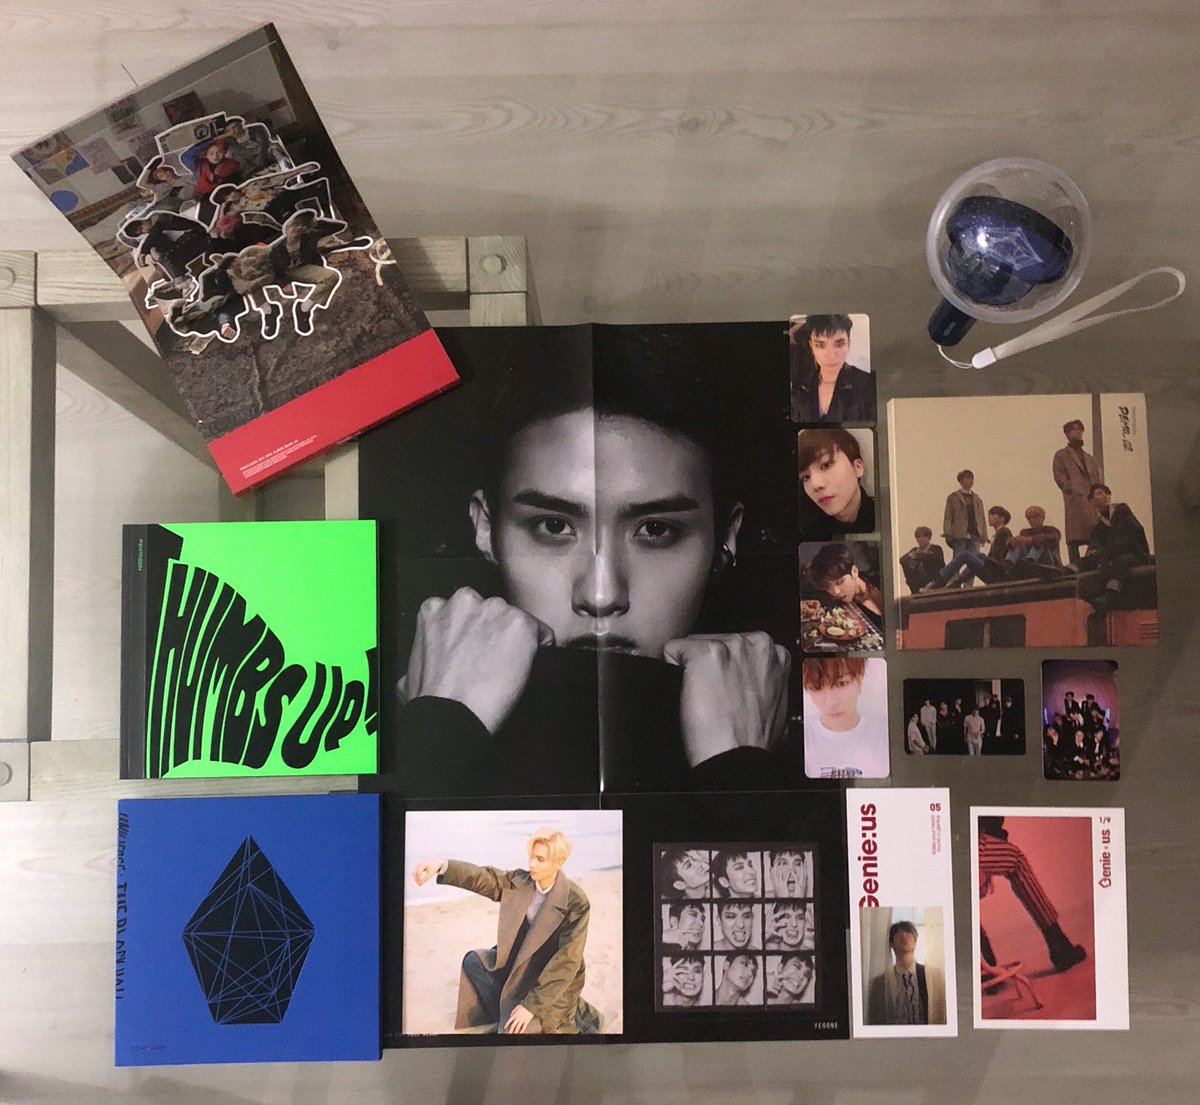 my albums and unibong arrived today so here are som pics of them and the random photocards and extras I got